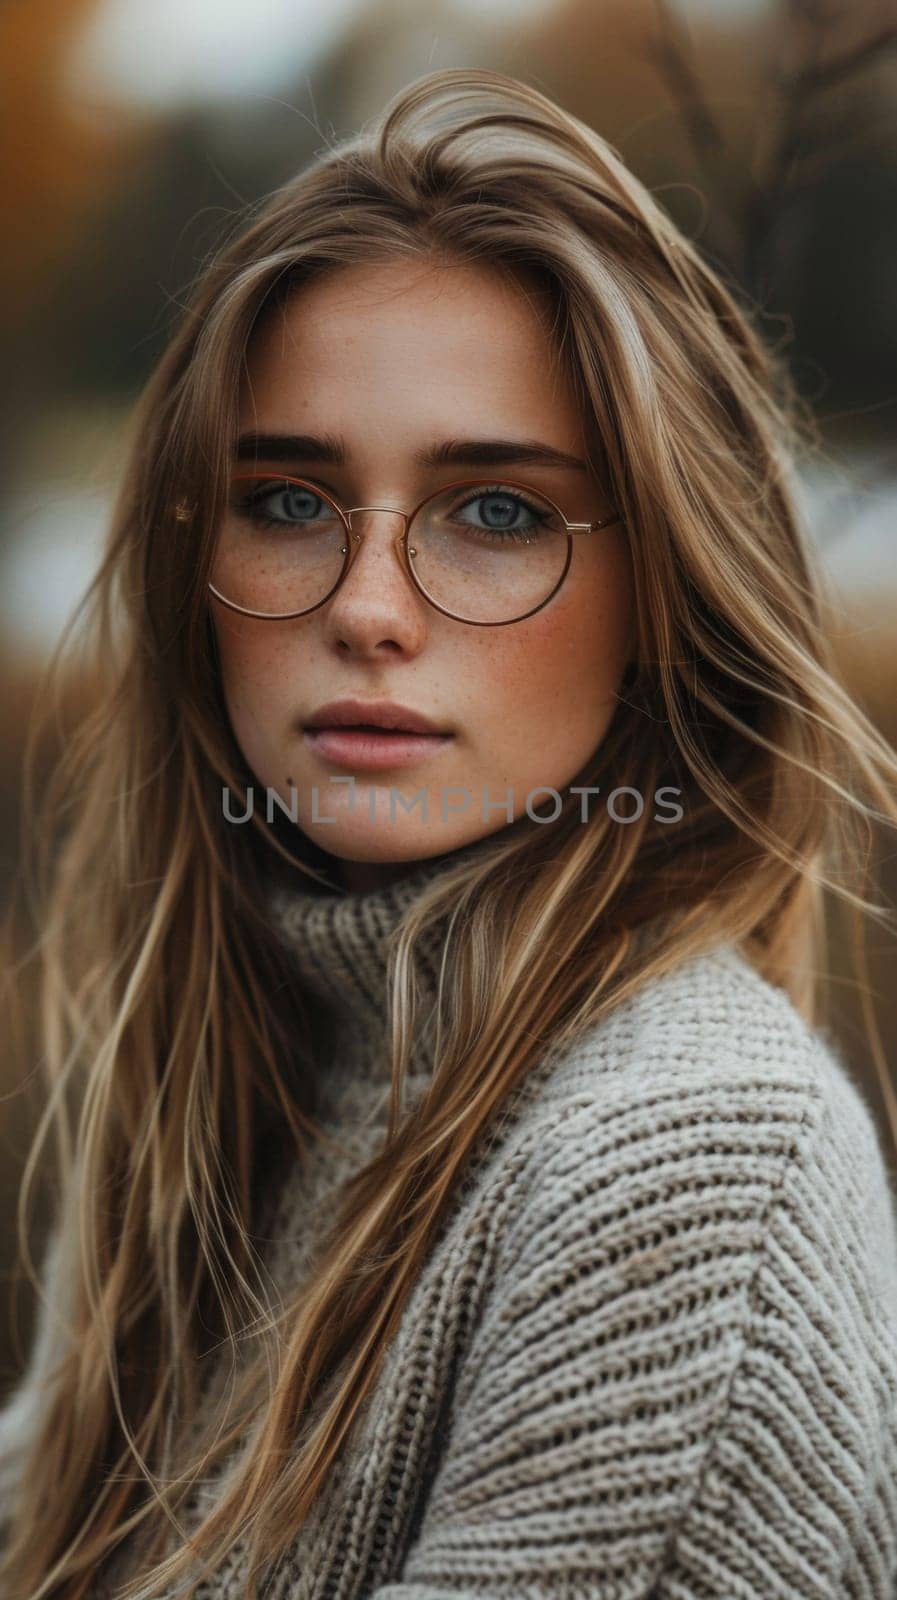 A woman with glasses and a sweater posing for the camera